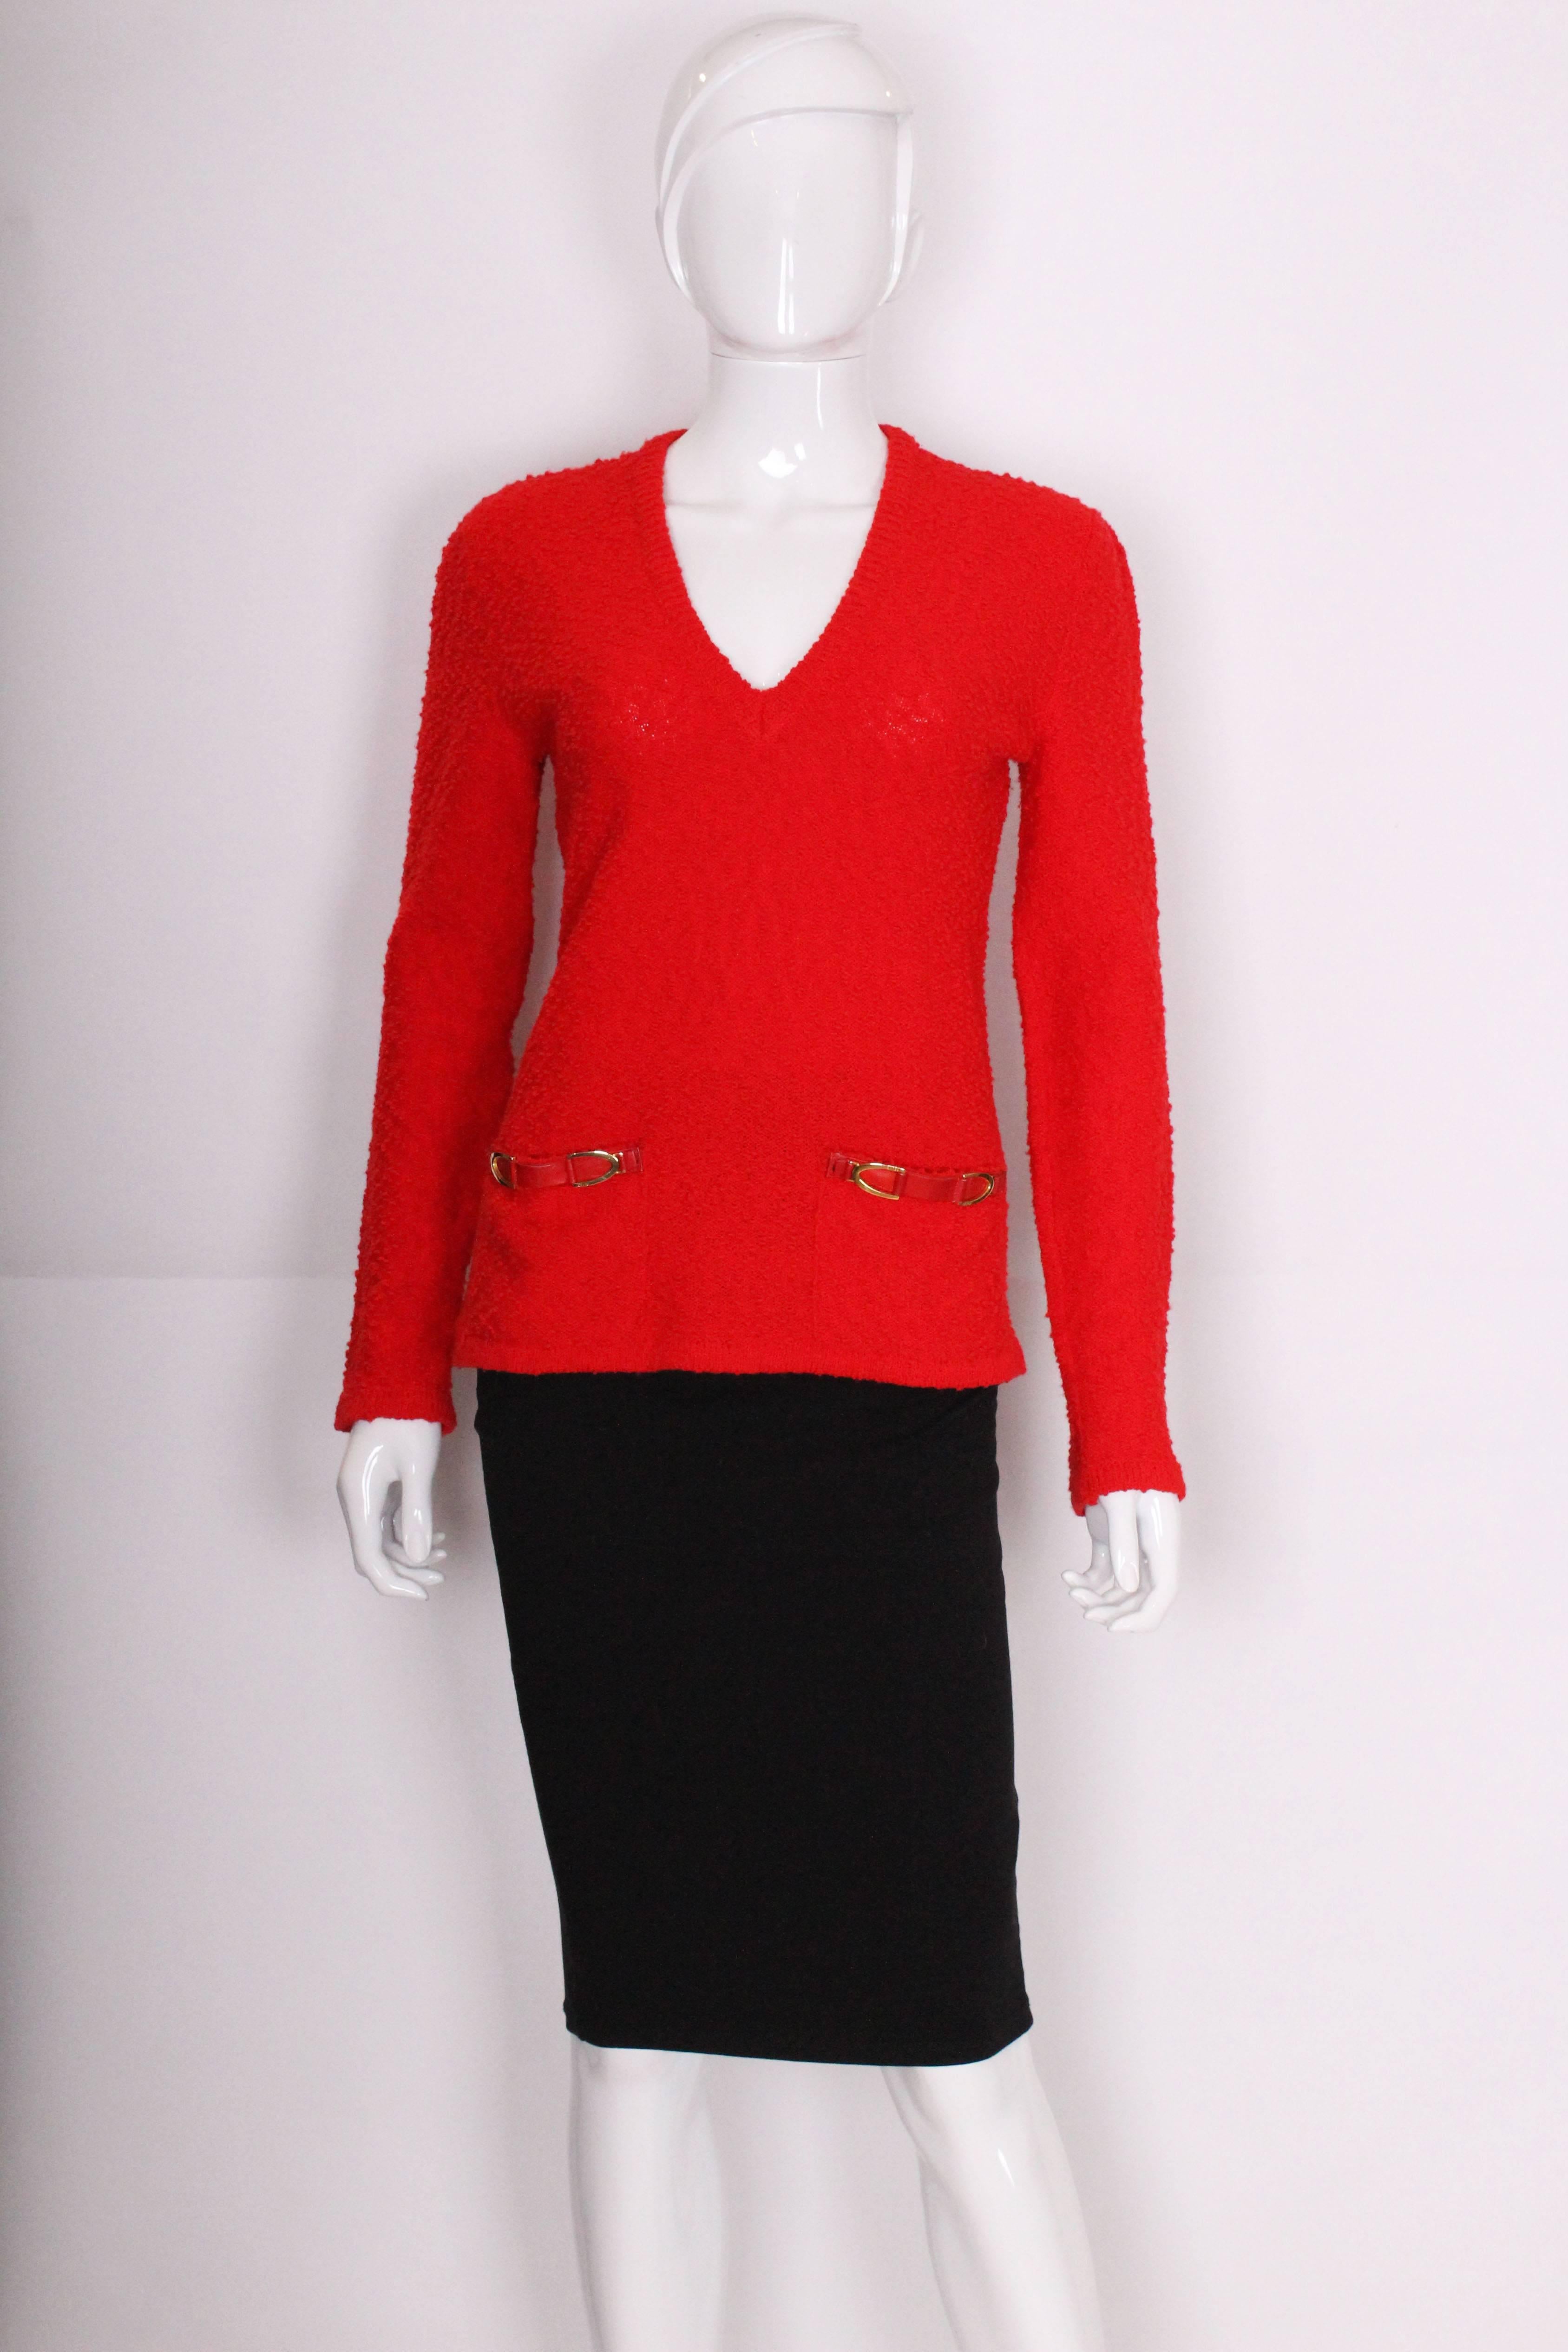 A great jumper for the festive season by Celine , Paris. In a red boucle wool with two pockets with stamped hardwear detail.The jumper is v neckline with ribbing around the neckline,hem and cuffs.